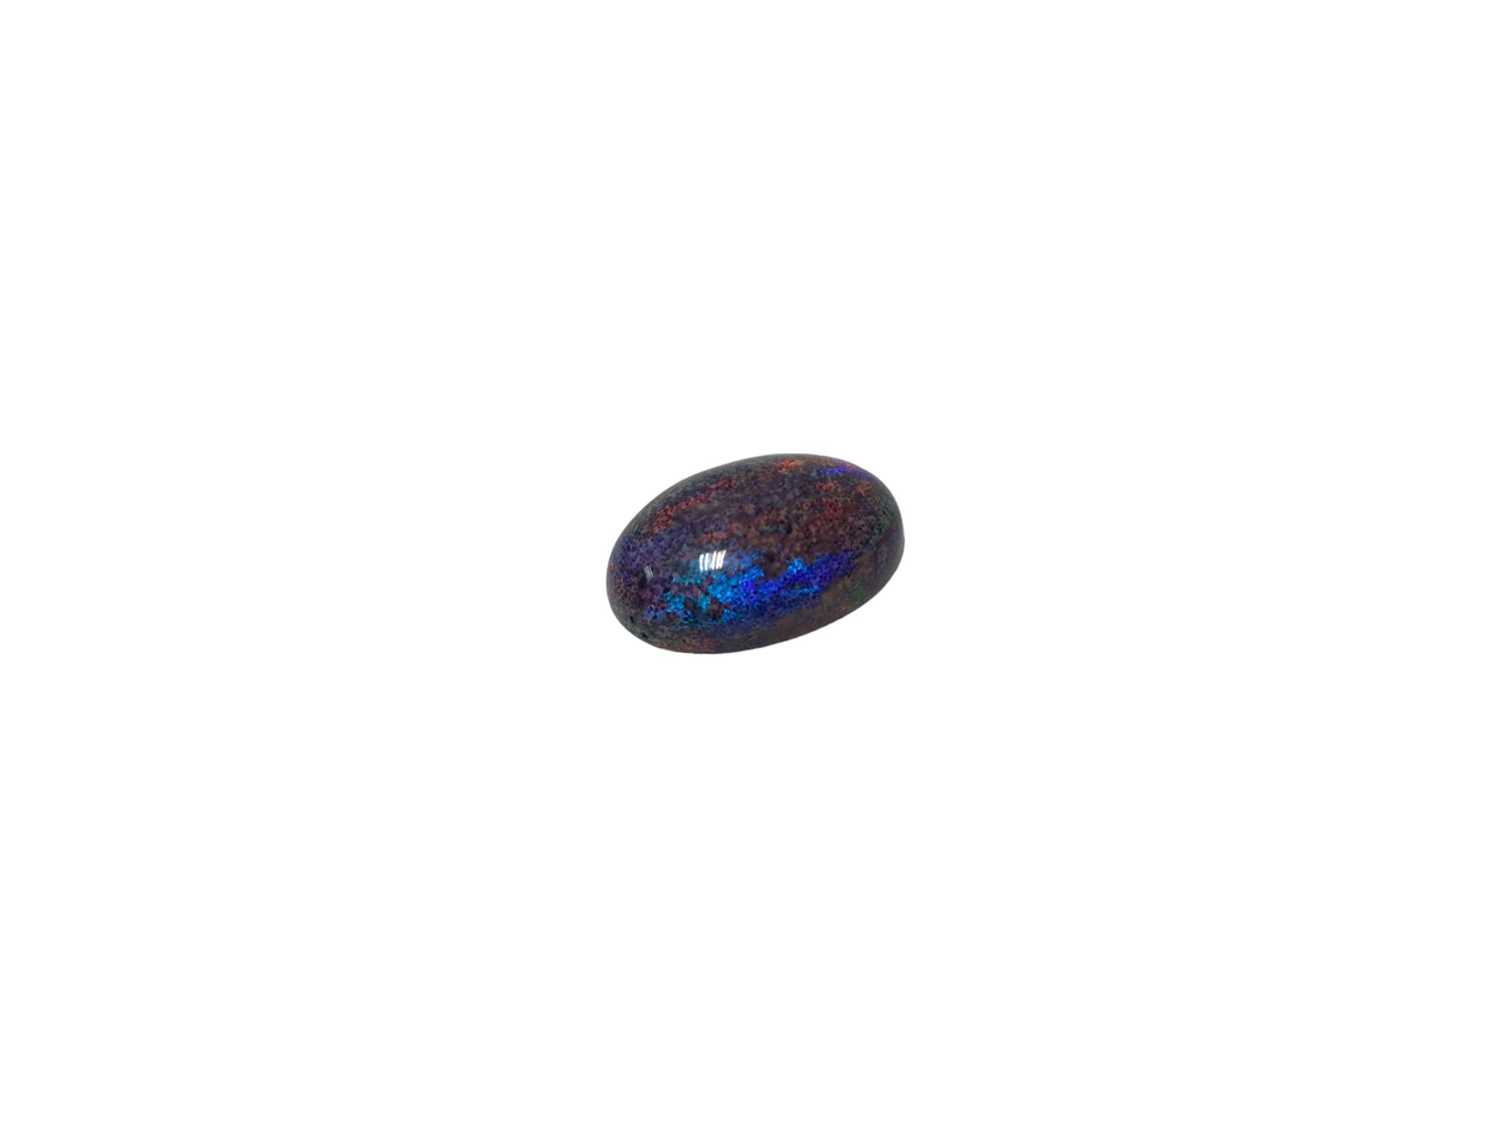 Unmounted black opal cabochon - Image 2 of 6